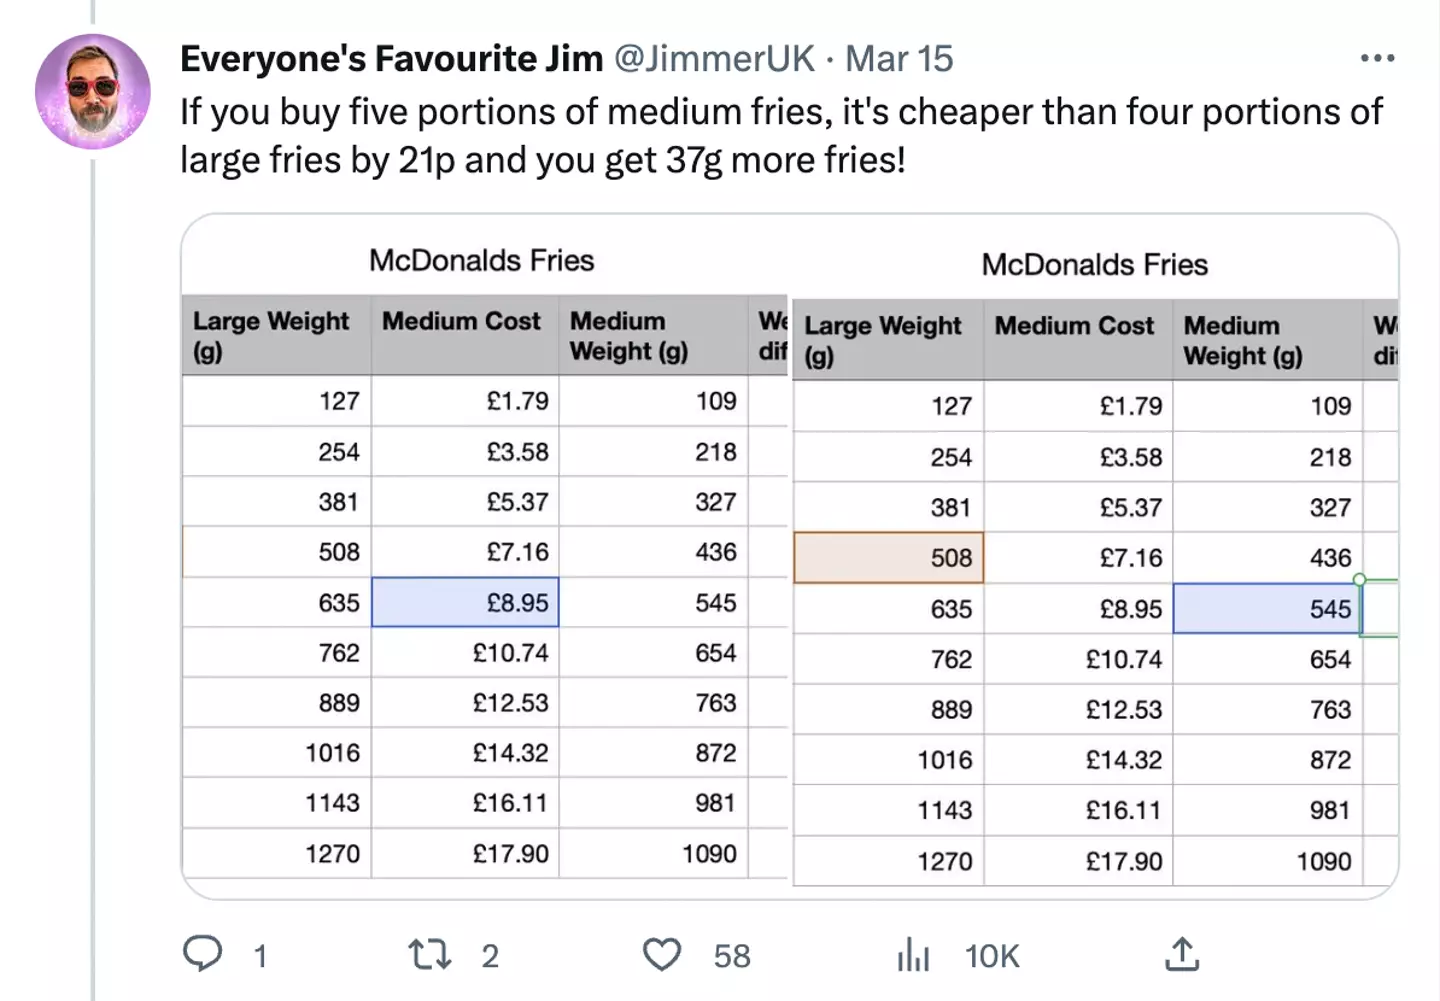 "If you buy five portions of medium fries, it's cheaper than four portions of large fries."